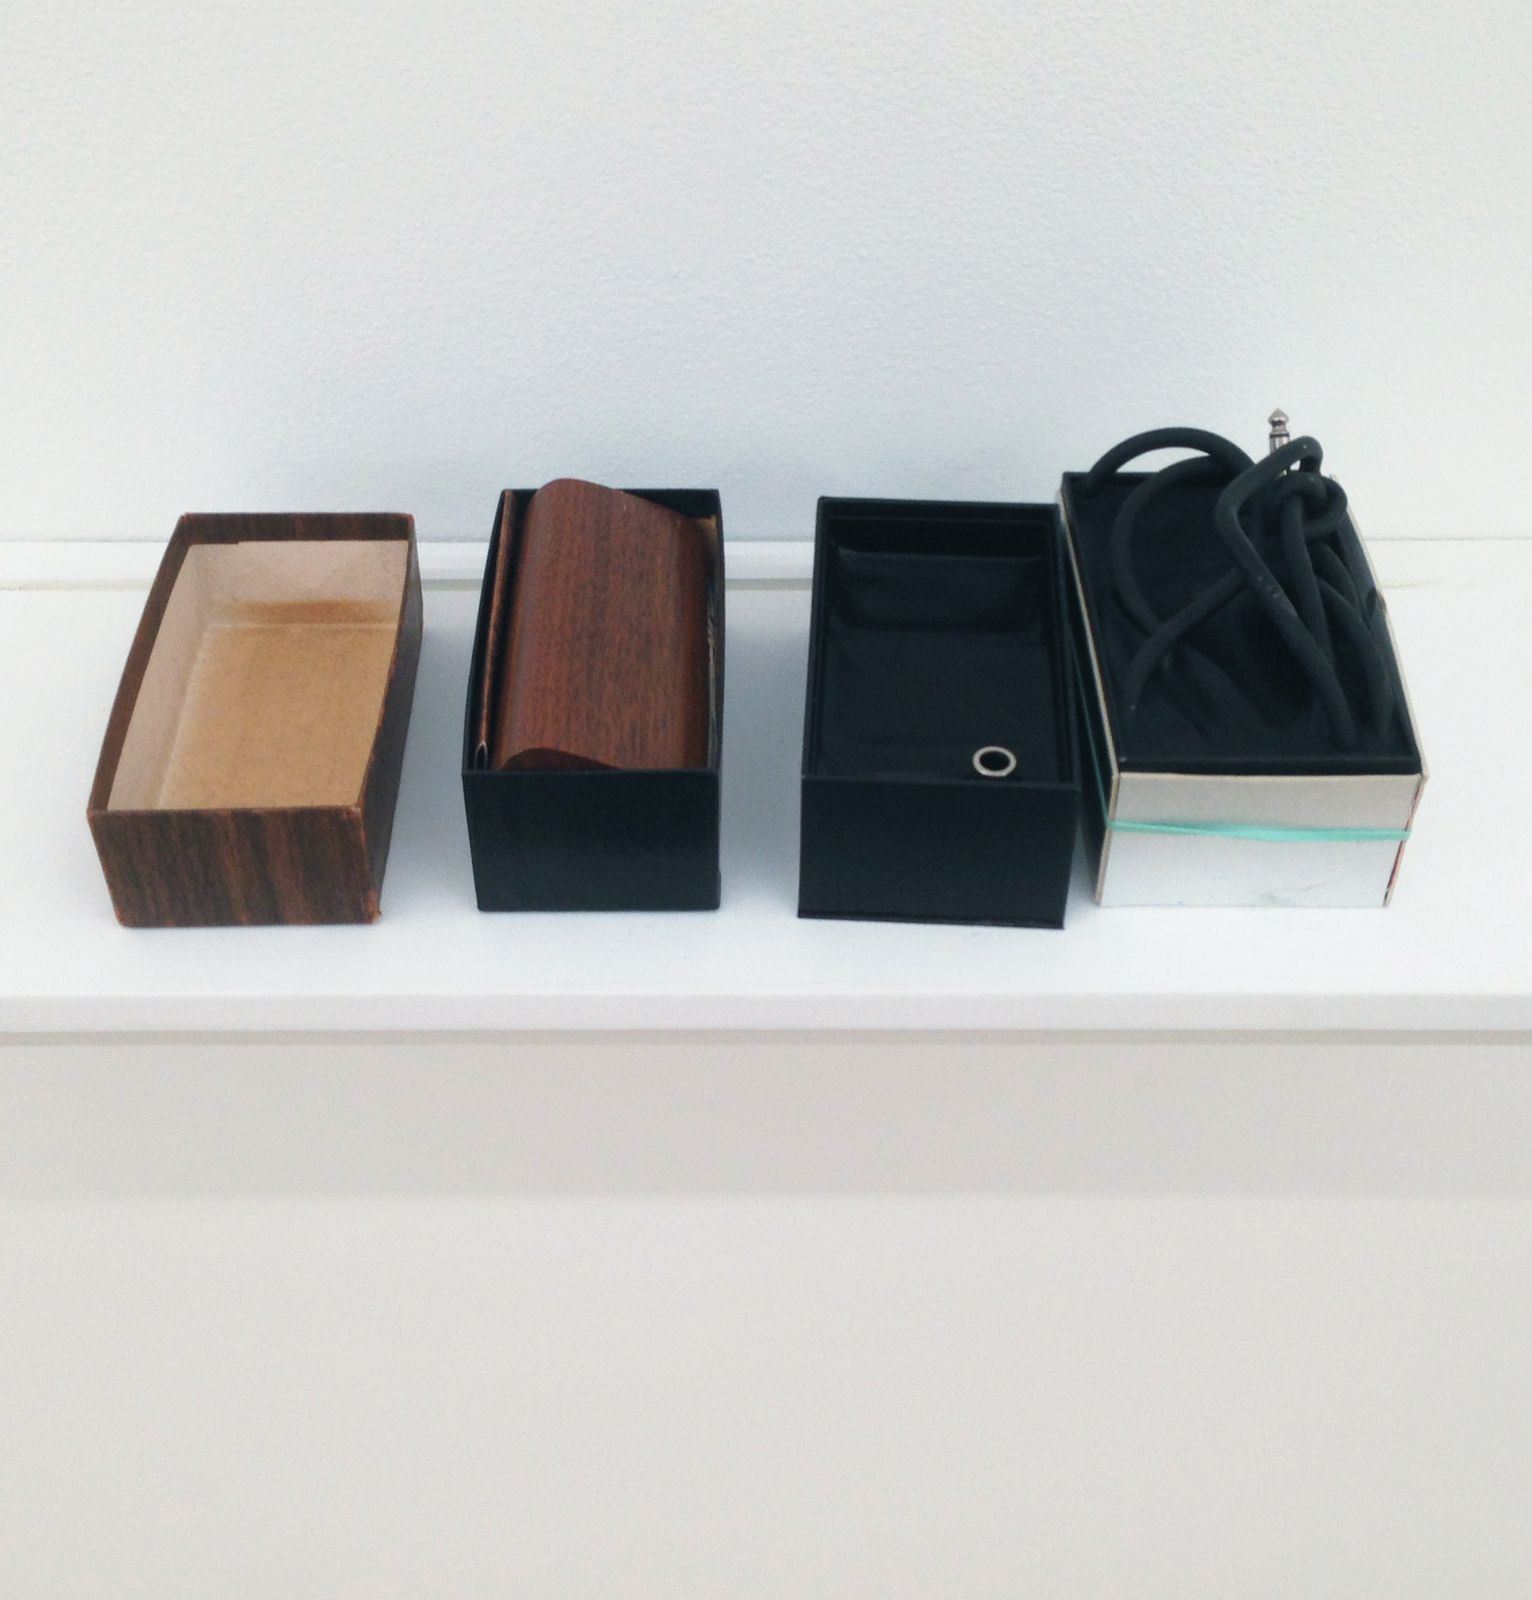 Bradley Kronz, UNTITLED, 2013, paper, boxes, disc cleaner, instrument cable, wax, 3 × 16 × 5 in.